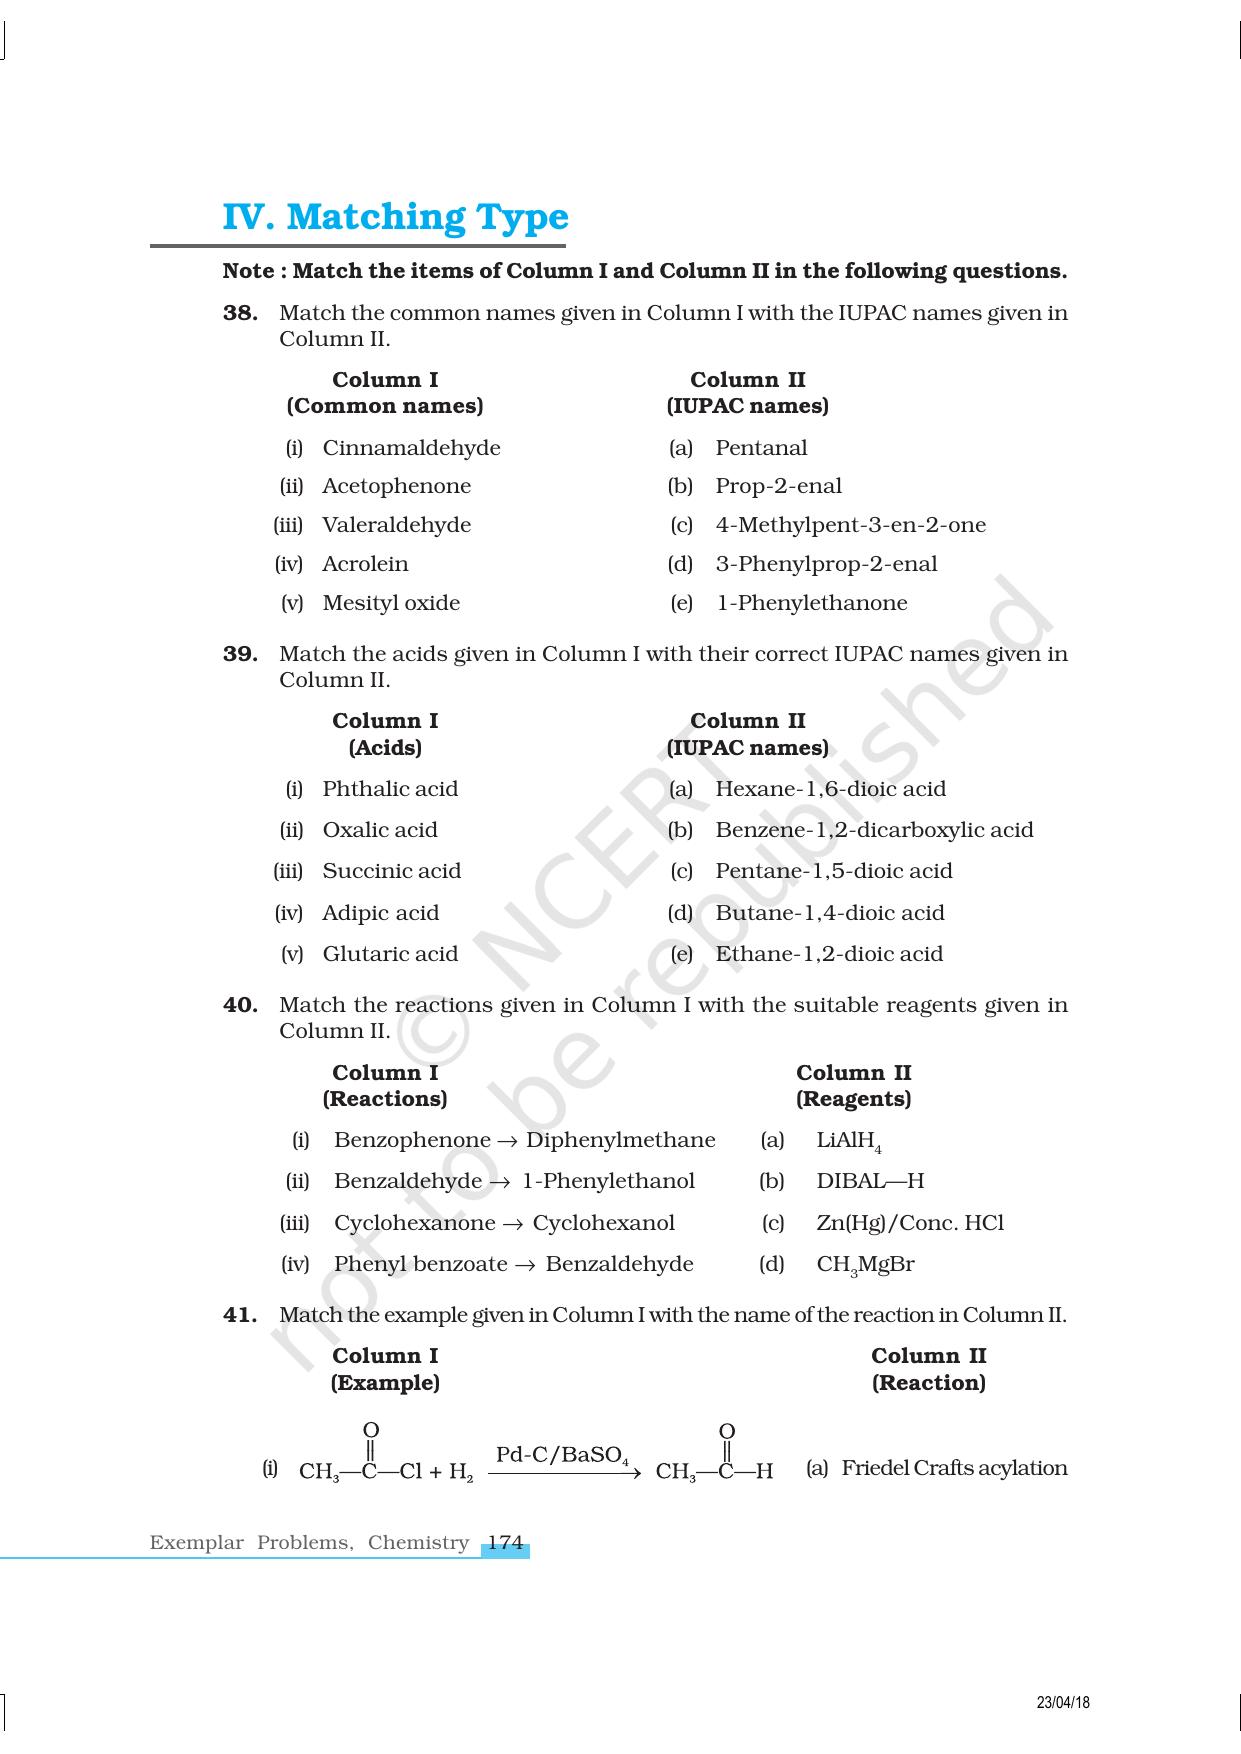 NCERT Exemplar Book for Class 12 Chemistry: Chapter 12 Aldehydes, Ketones and Carboxylic Acids - Page 7